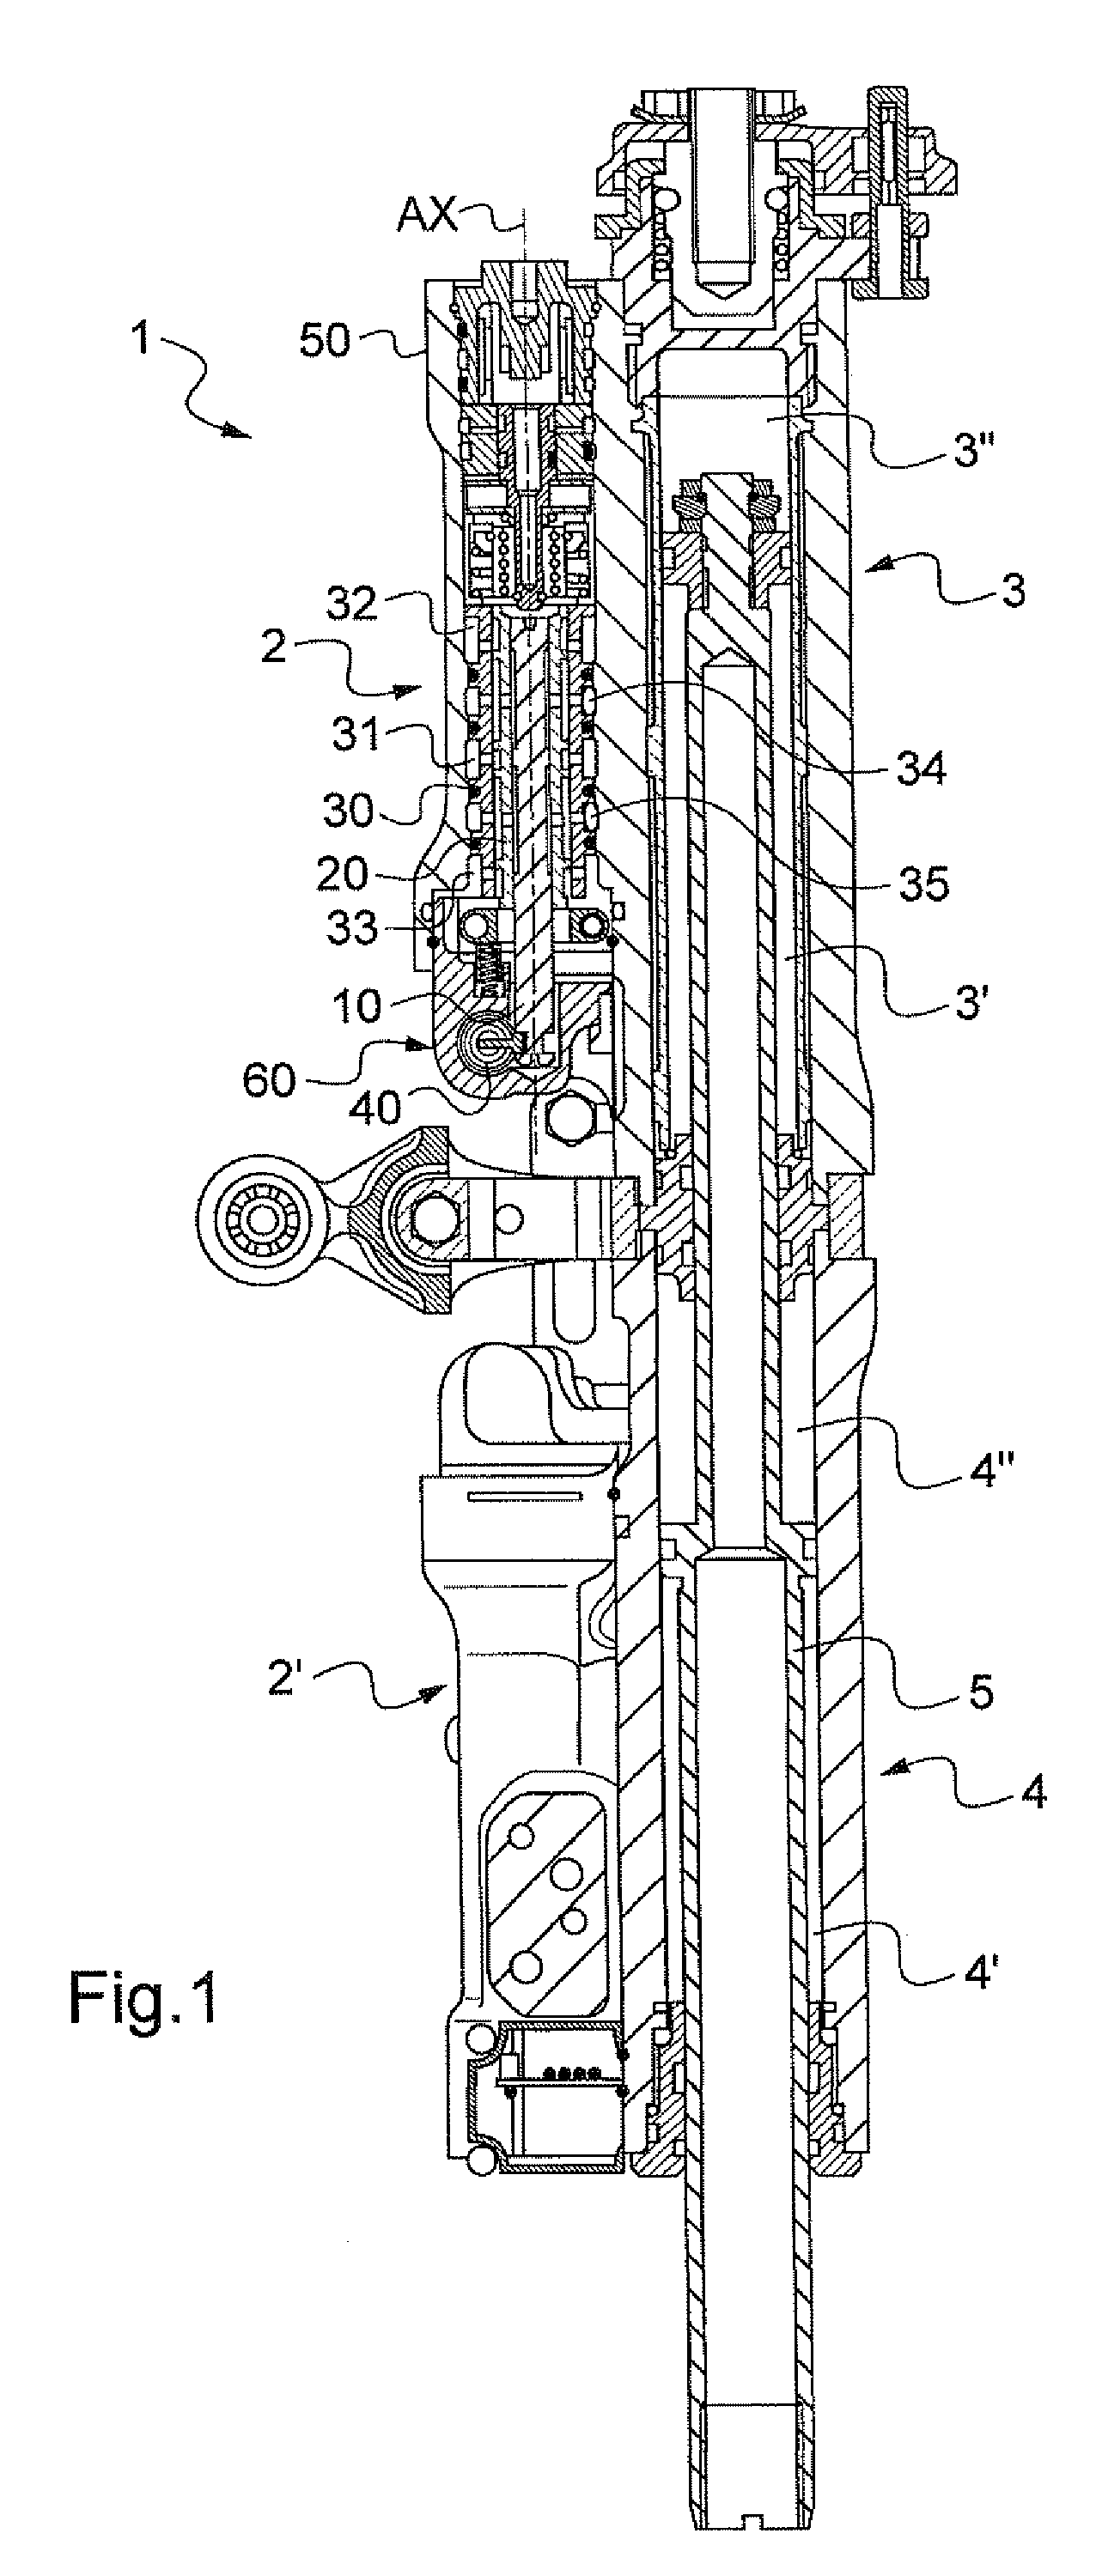 Hydraulic distributor provided with a device for detecting seizing